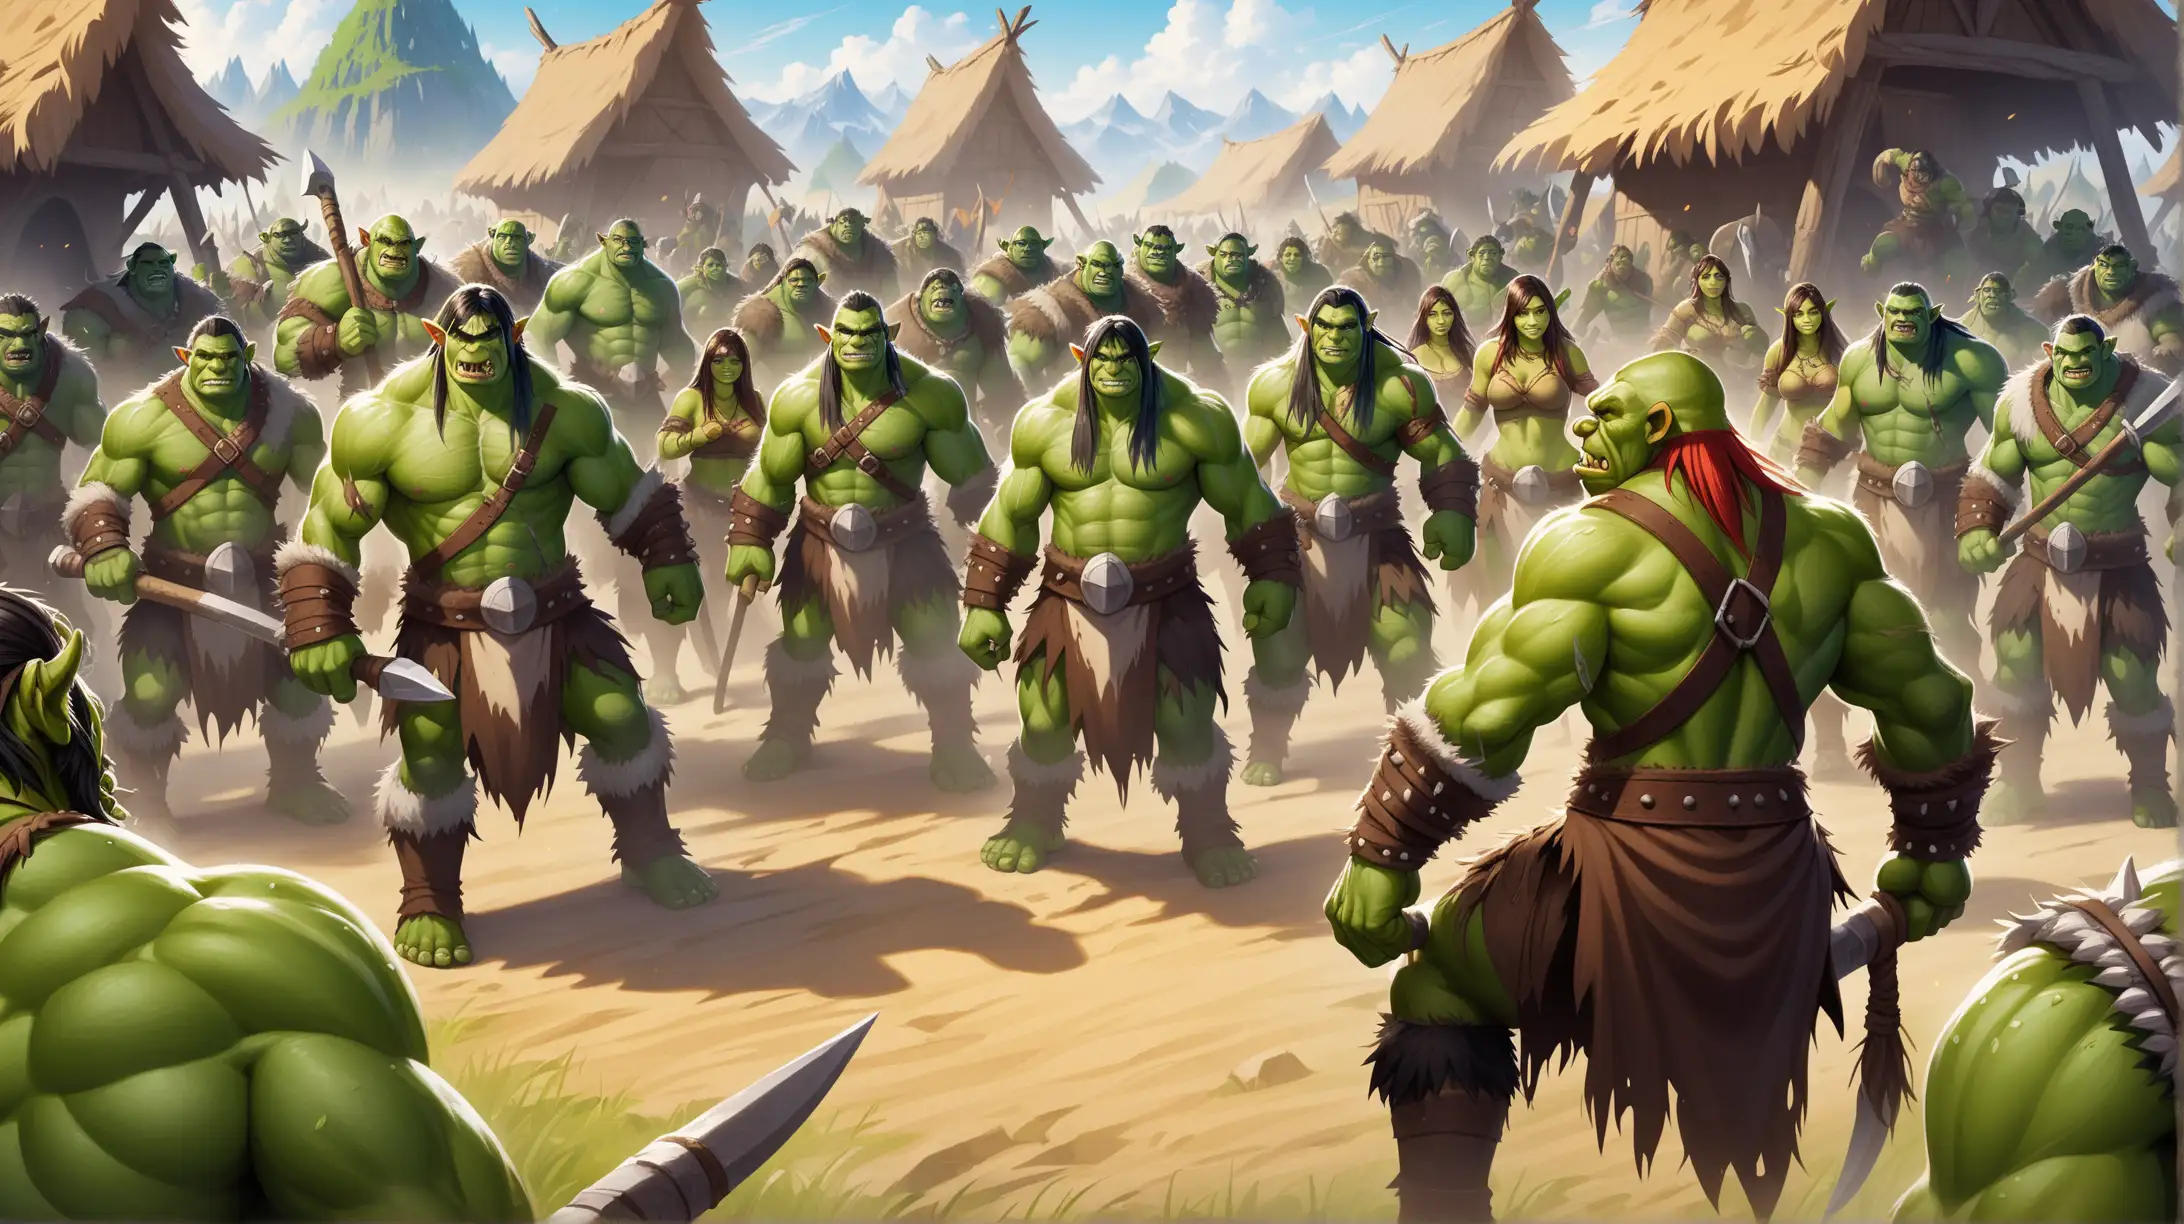 Medieval Fantasy Scene Green Orc Tribe in Their Village